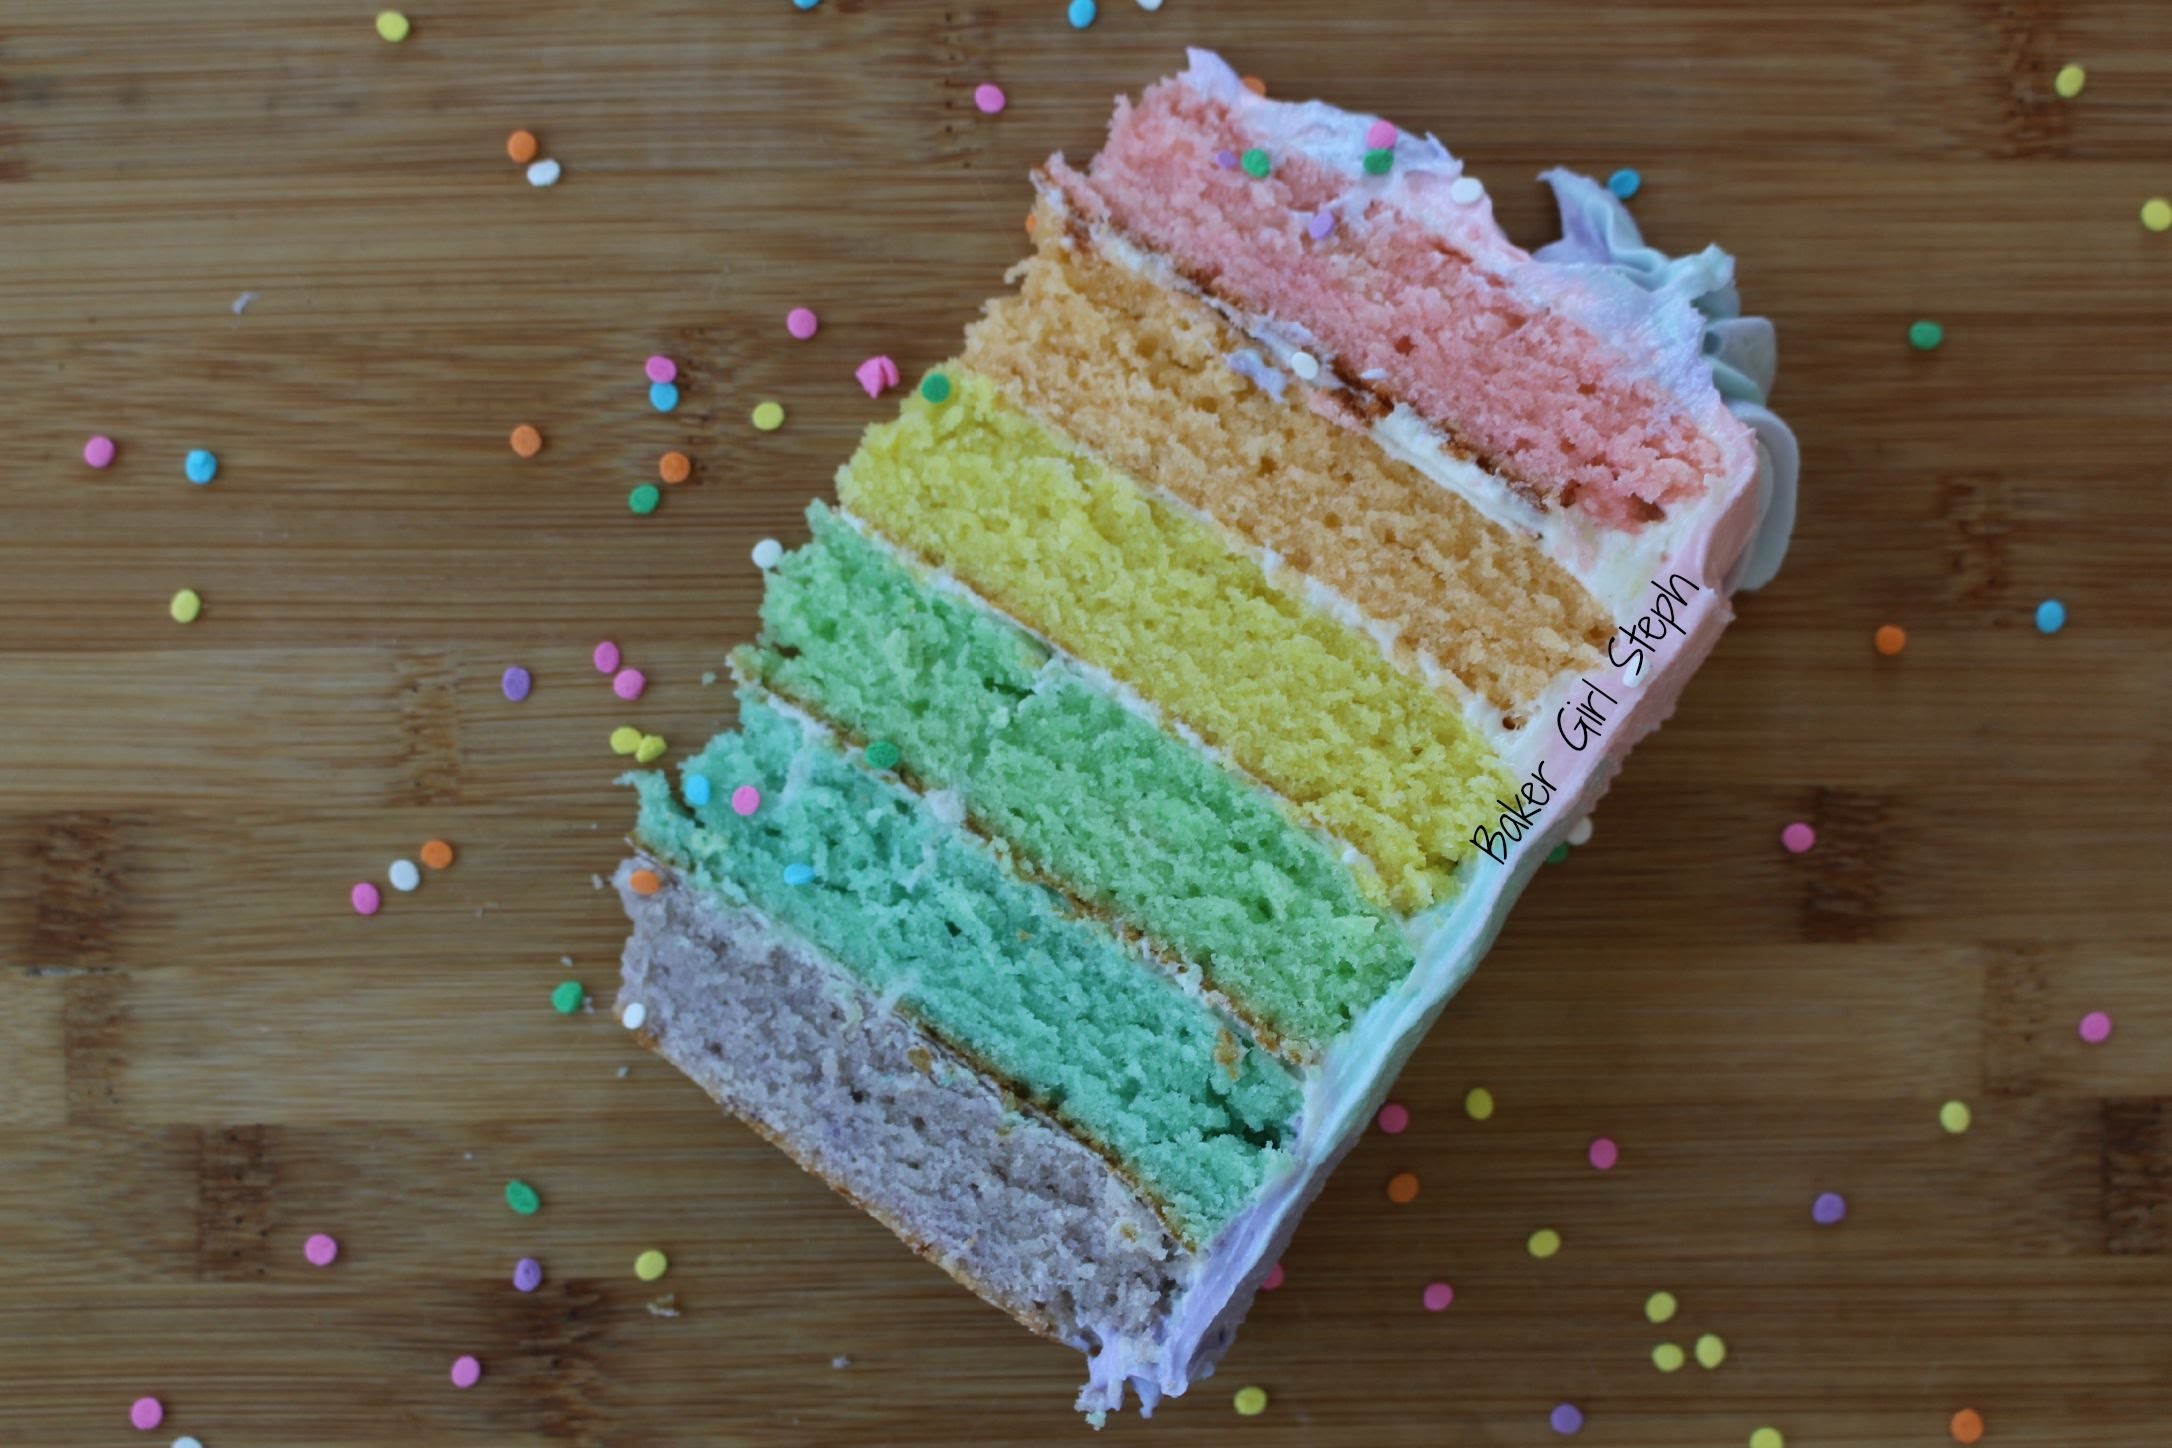 PASTEL RAINBOW CAKE WITH OMBRE FROSTING